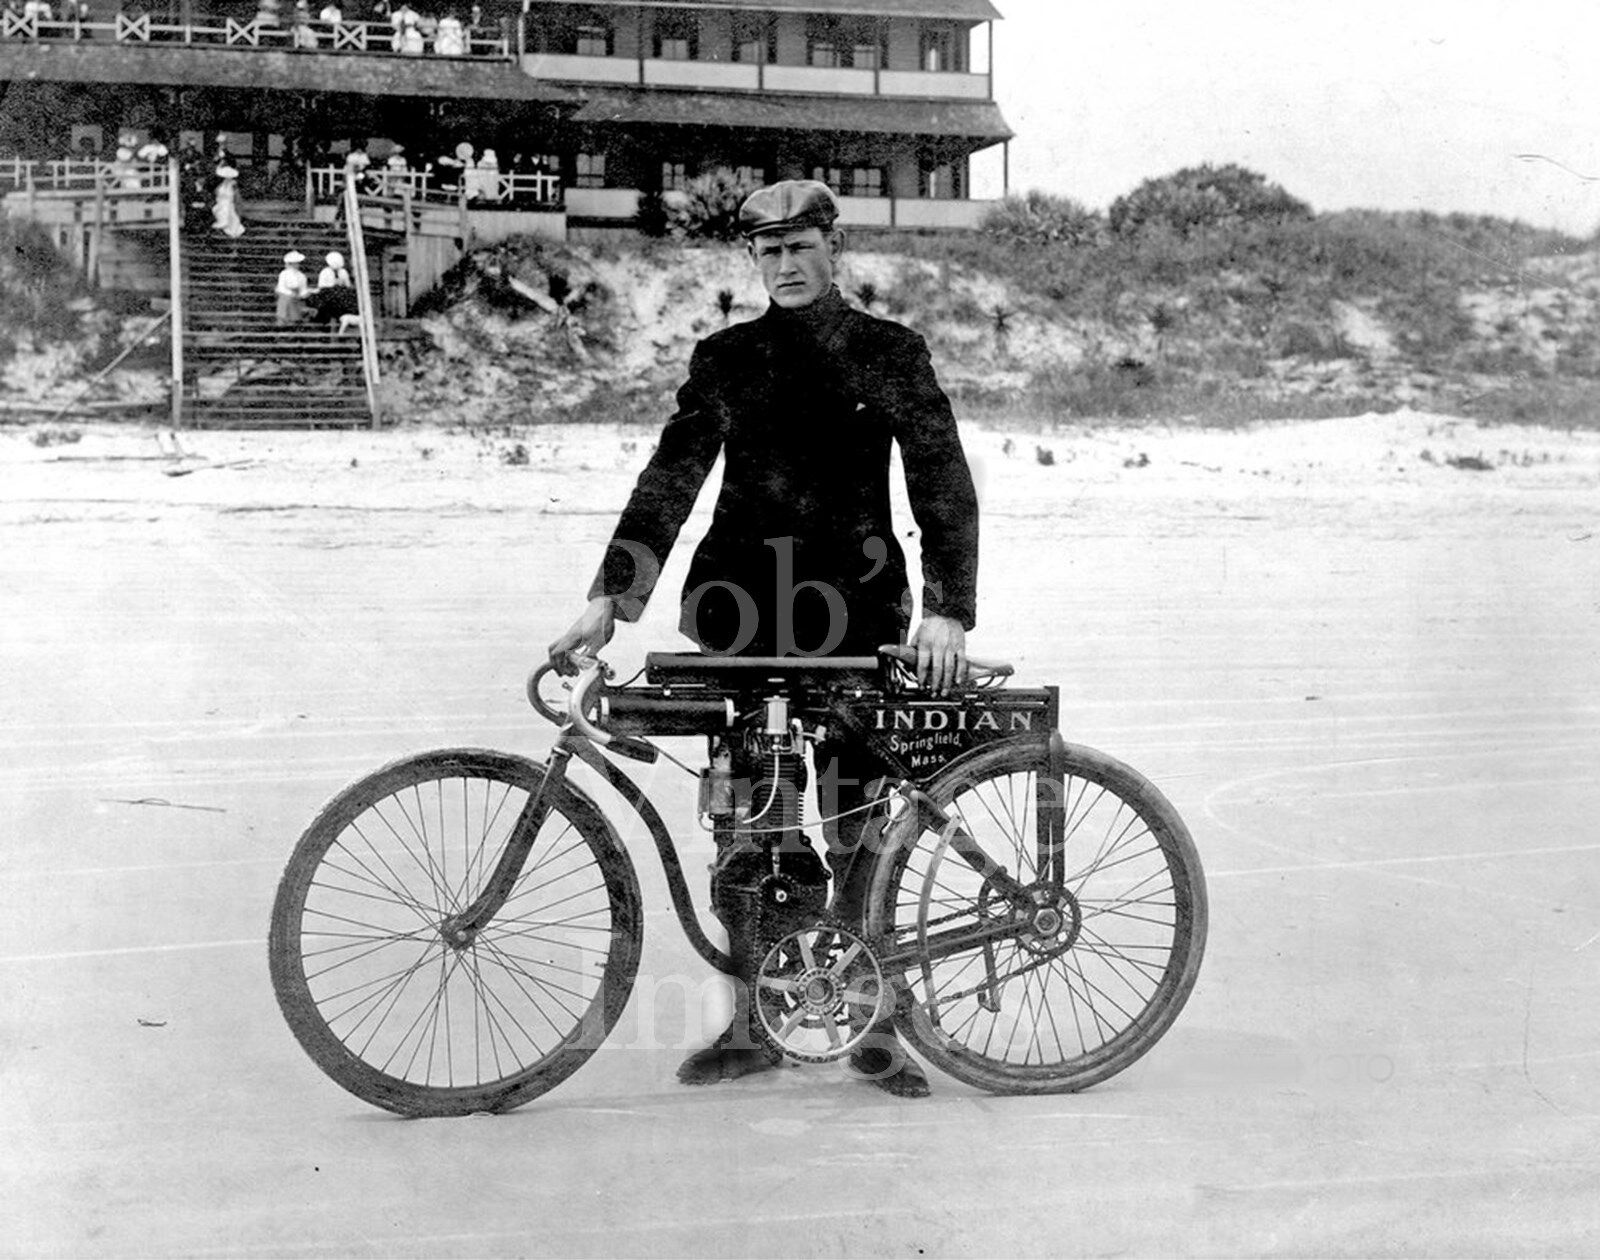 Indian Vintage Motorcycle Photo on Beach 1903 